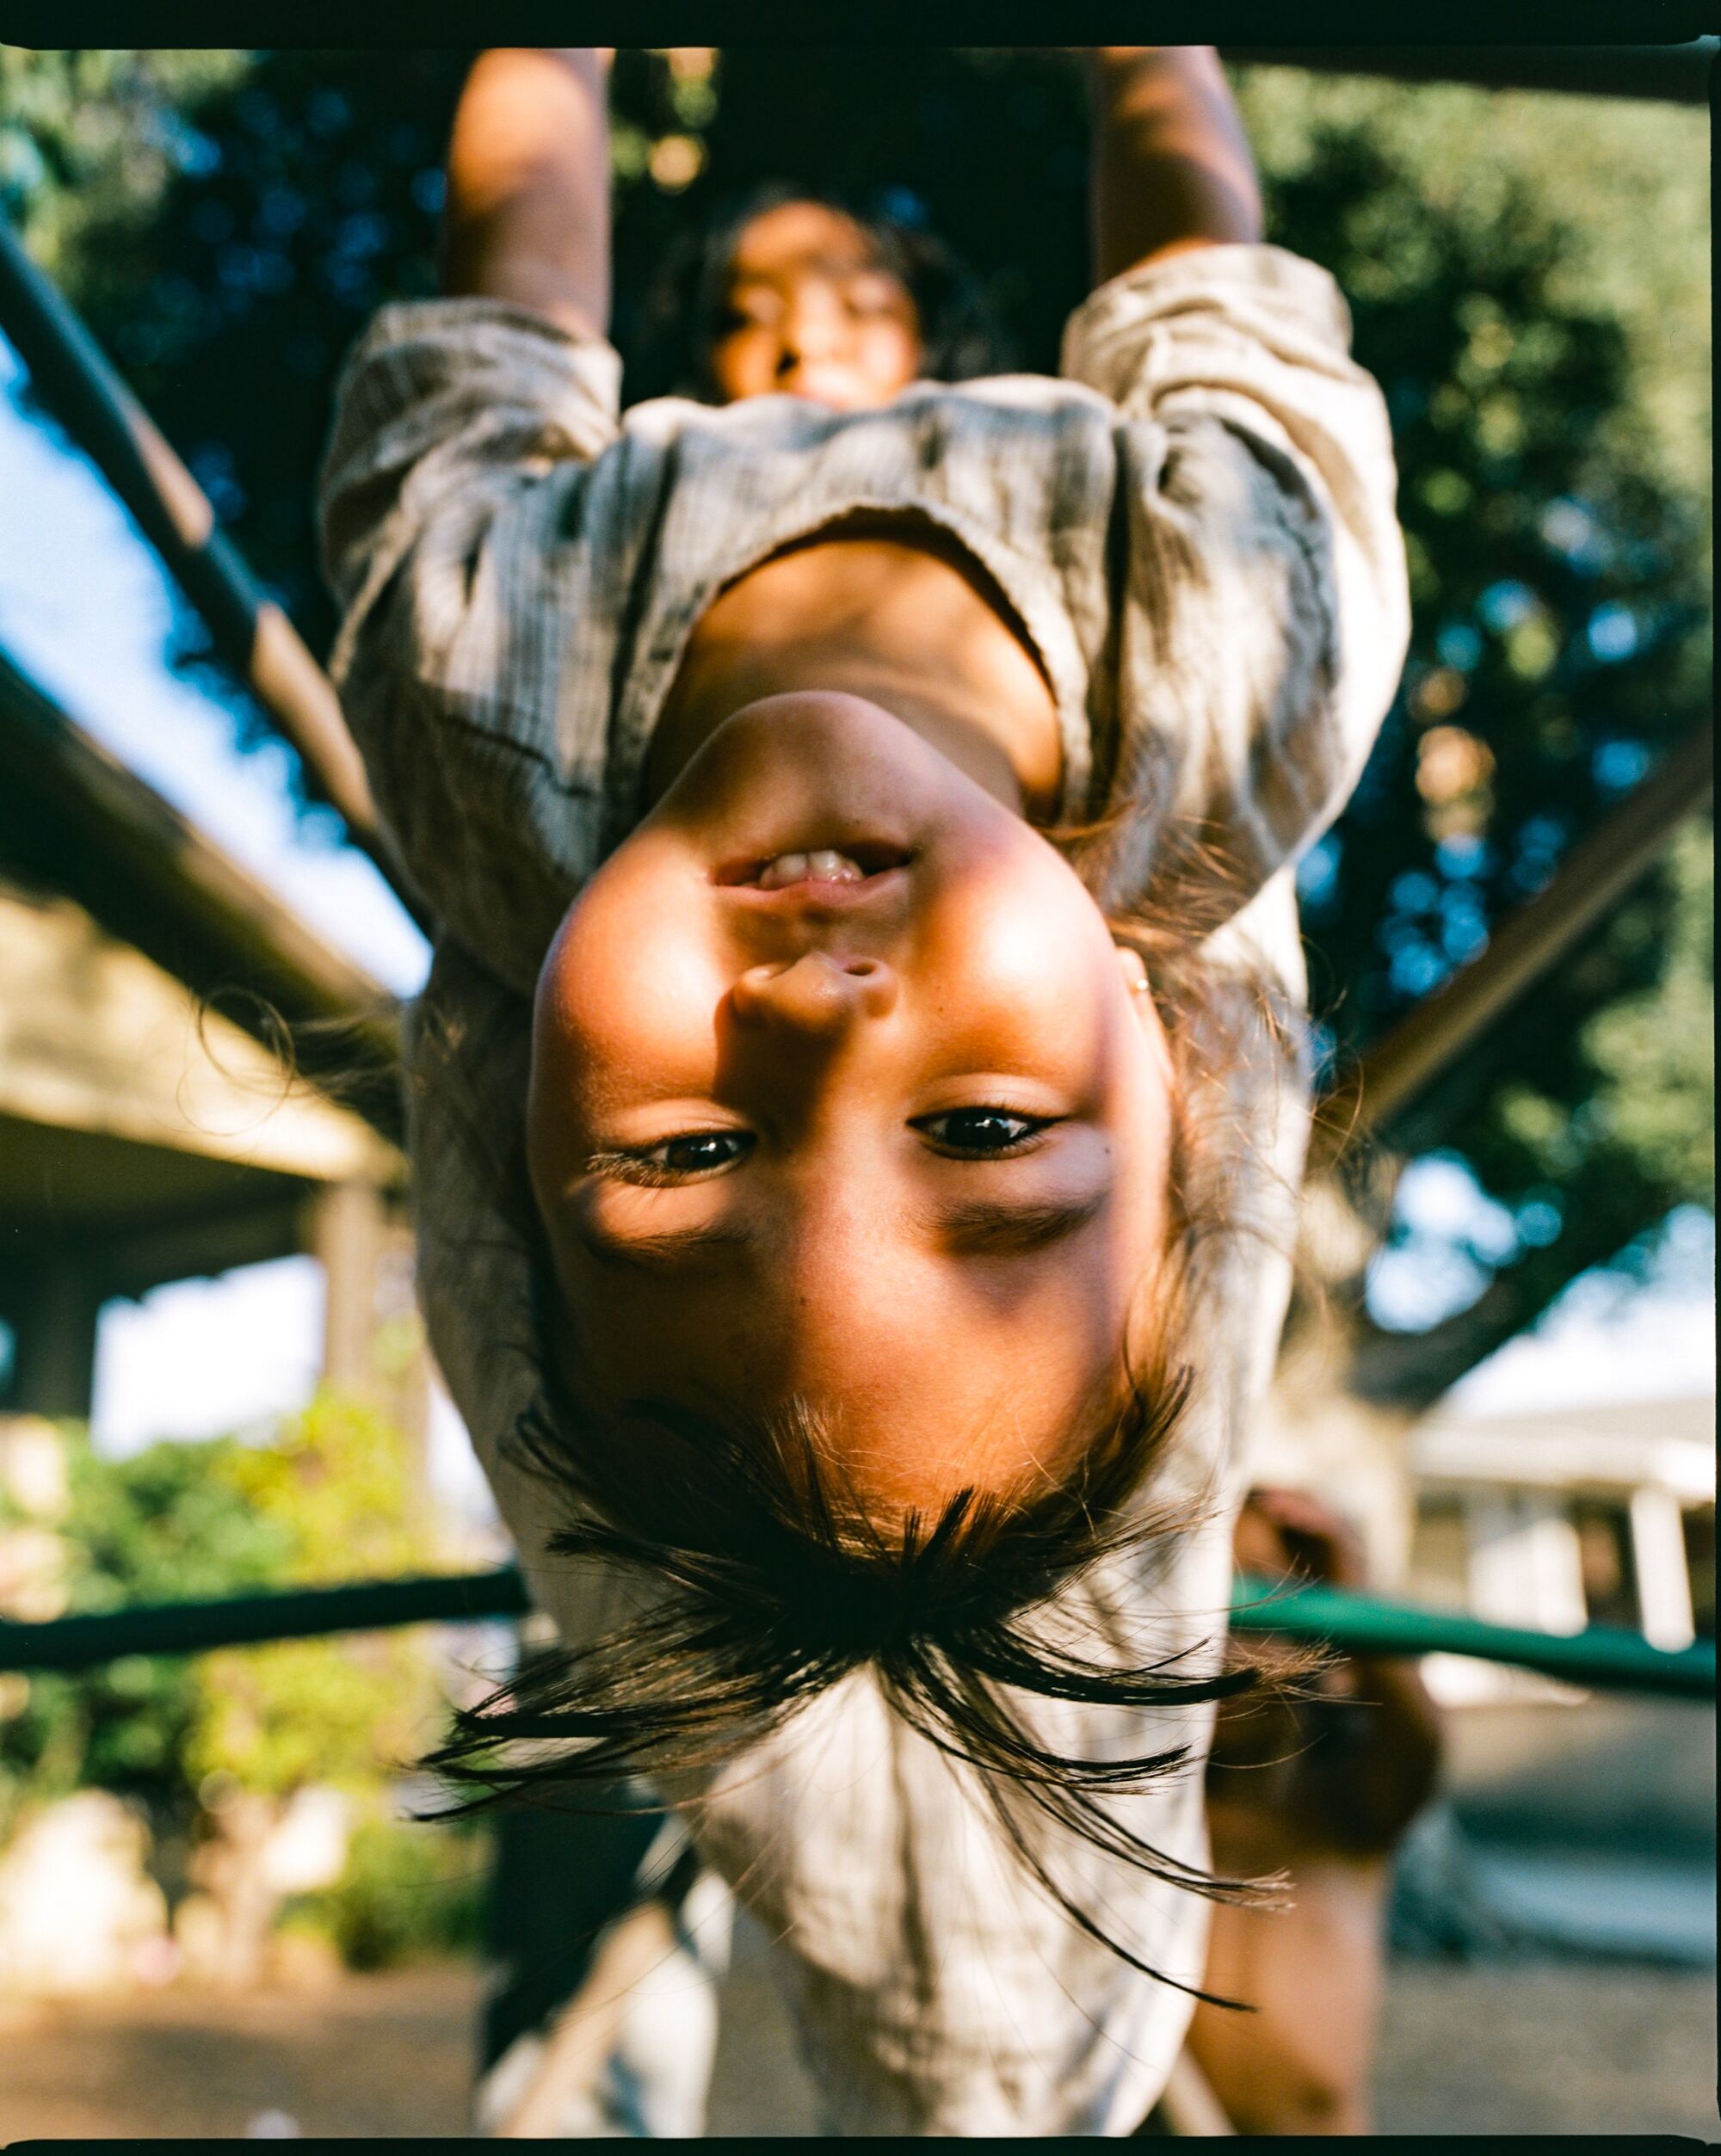 Synmia's daughter upside down on a jungle gym